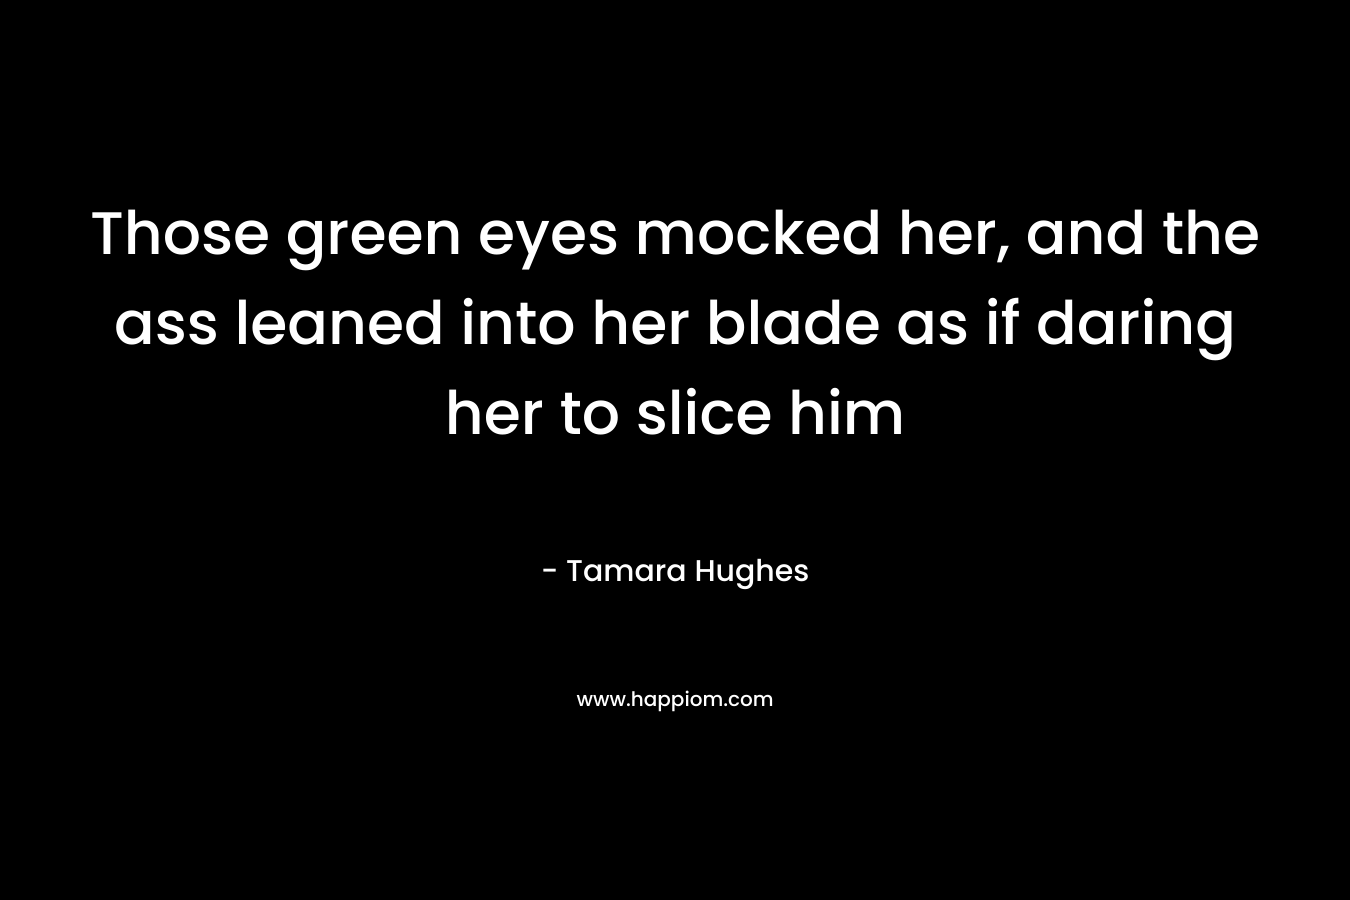 Those green eyes mocked her, and the ass leaned into her blade as if daring her to slice him – Tamara Hughes